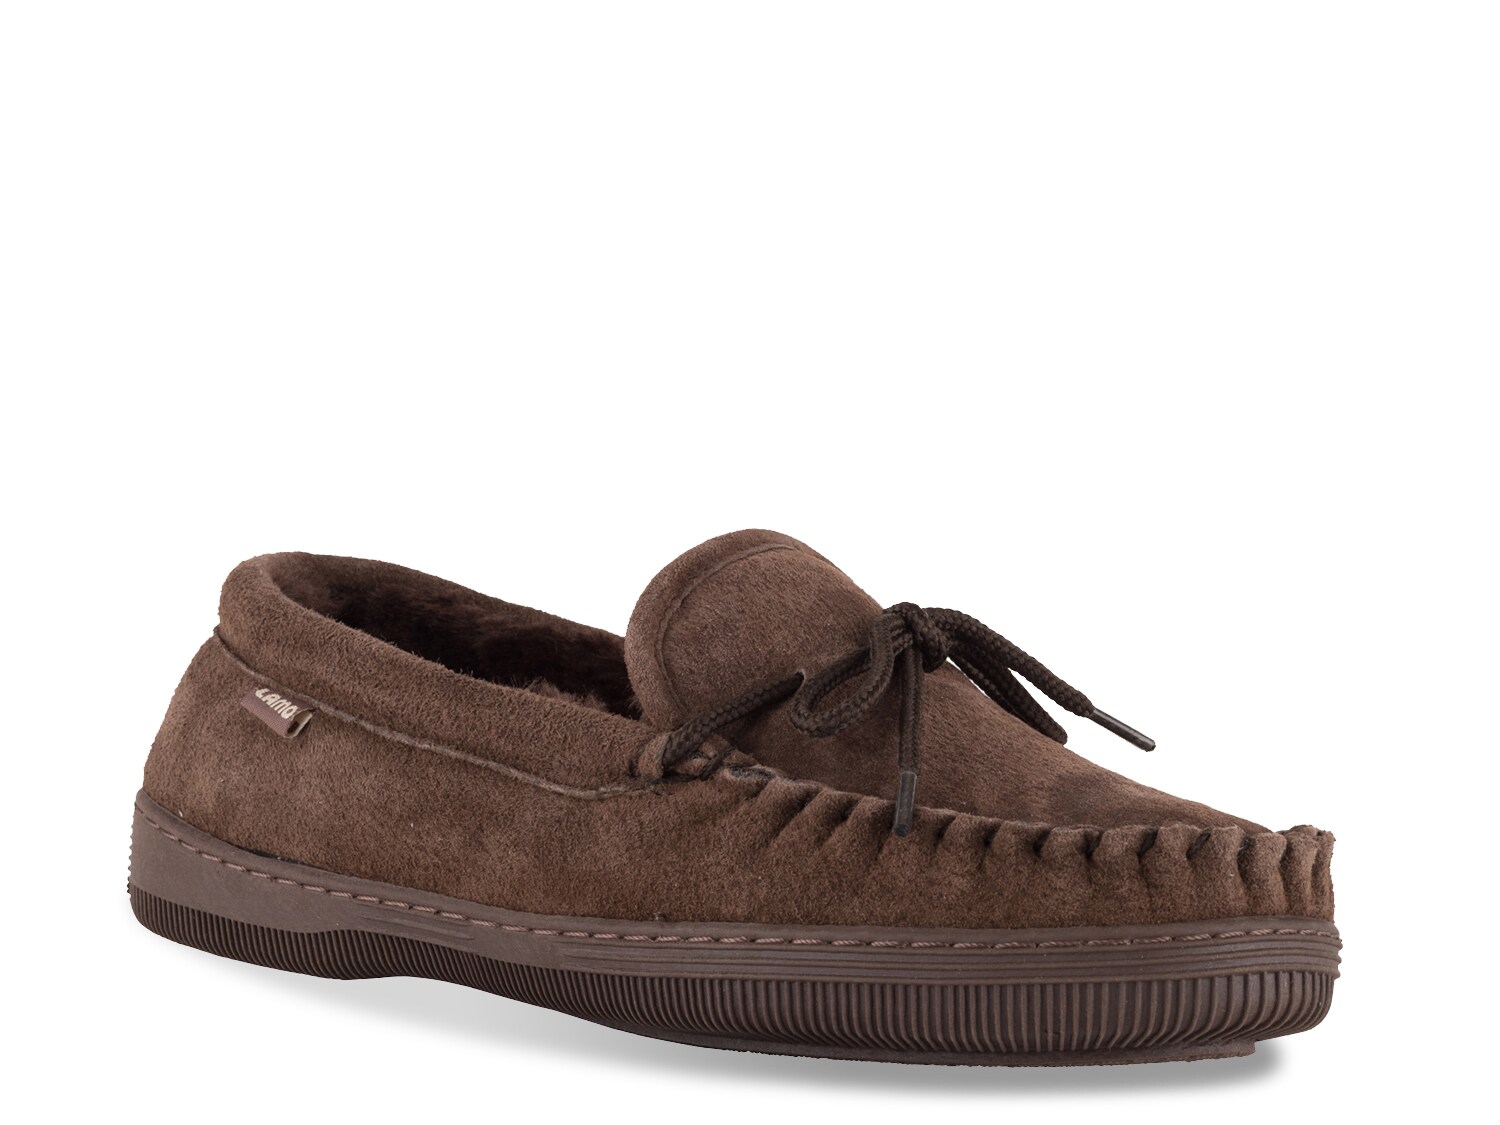 lucky brand moccasin slippers